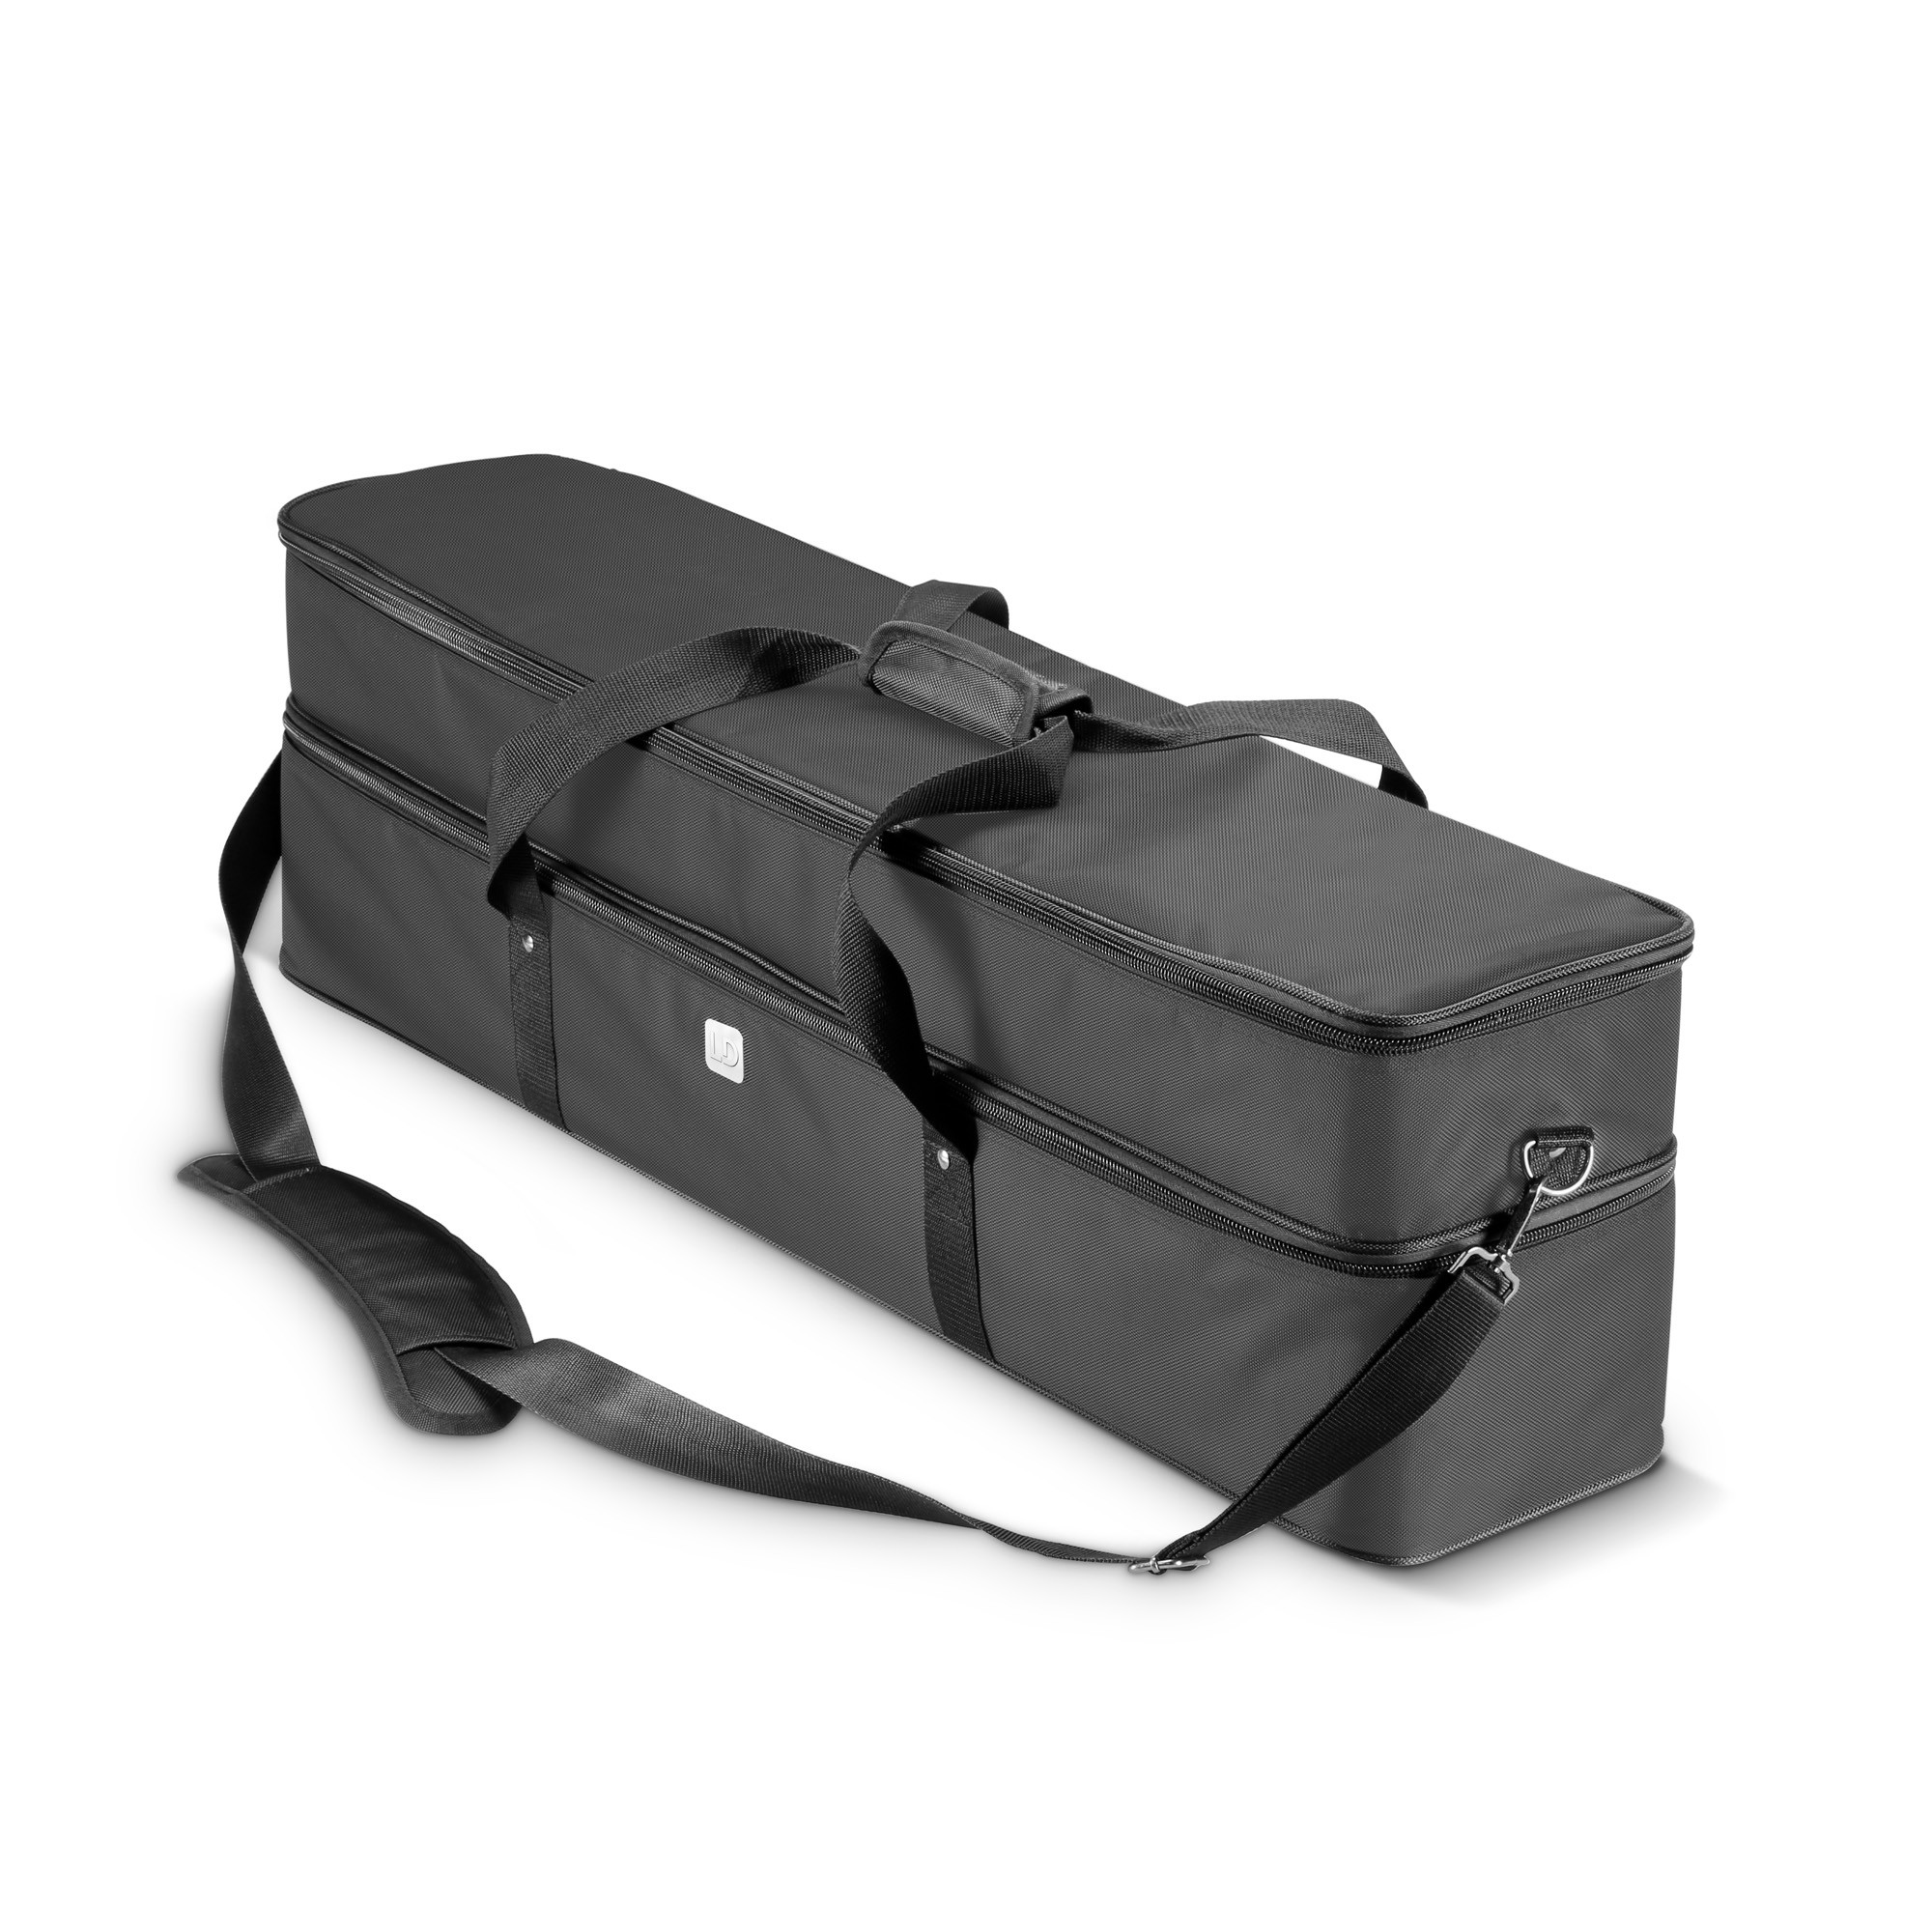 Ld Systems Curv 500 Ts Sat Bag - Luidsprekers & subwoofer hoes - Variation 4